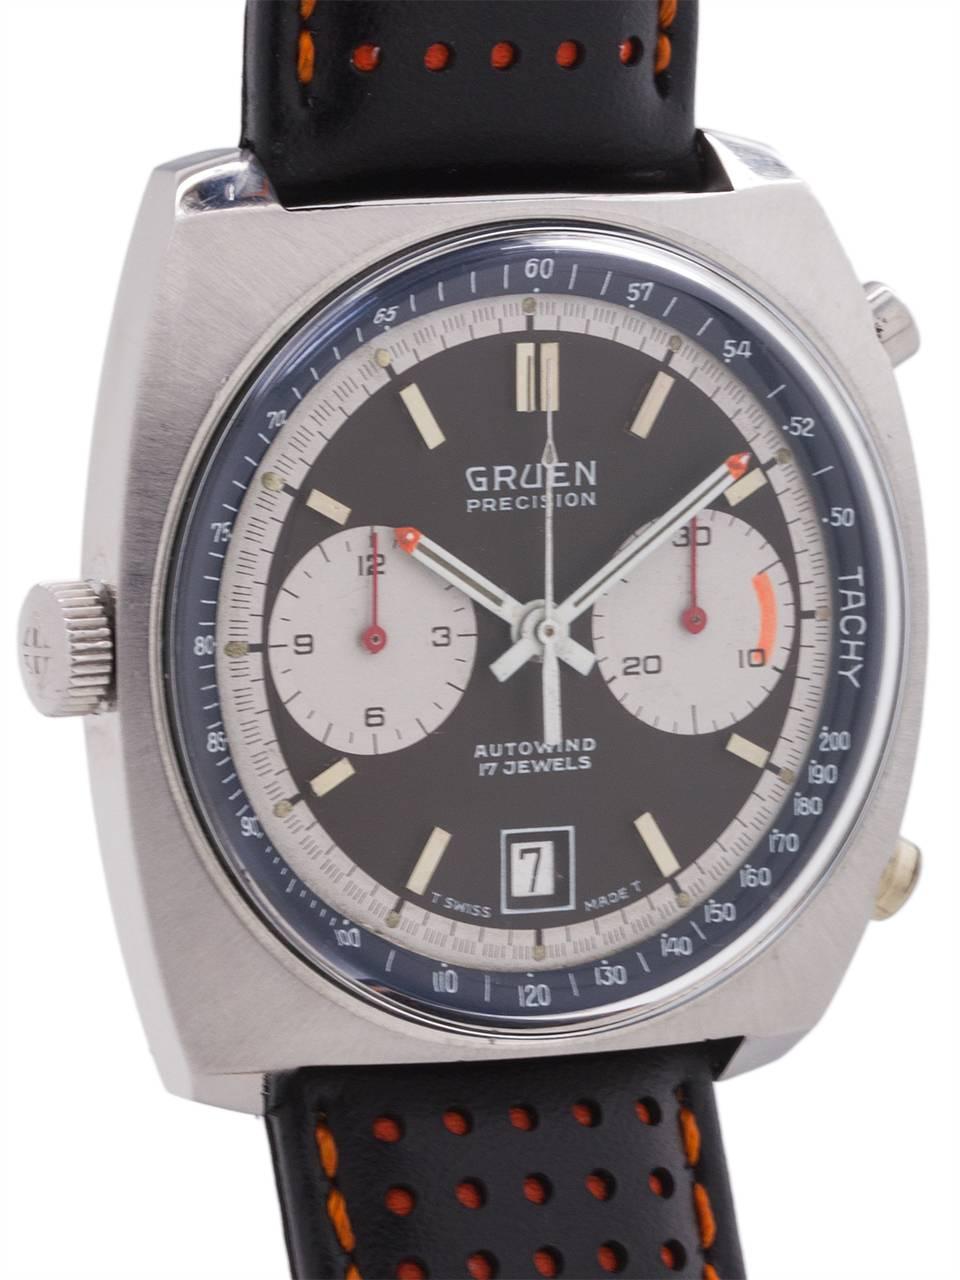 
Gruen “Autavia” style automatic chronograph circa 1970’s. Featuring 40mm diameter cushion shaped case. Featuring a colorful black original dial with over sized white registers, applied silver indexes, white outer track, and sloped contrasting